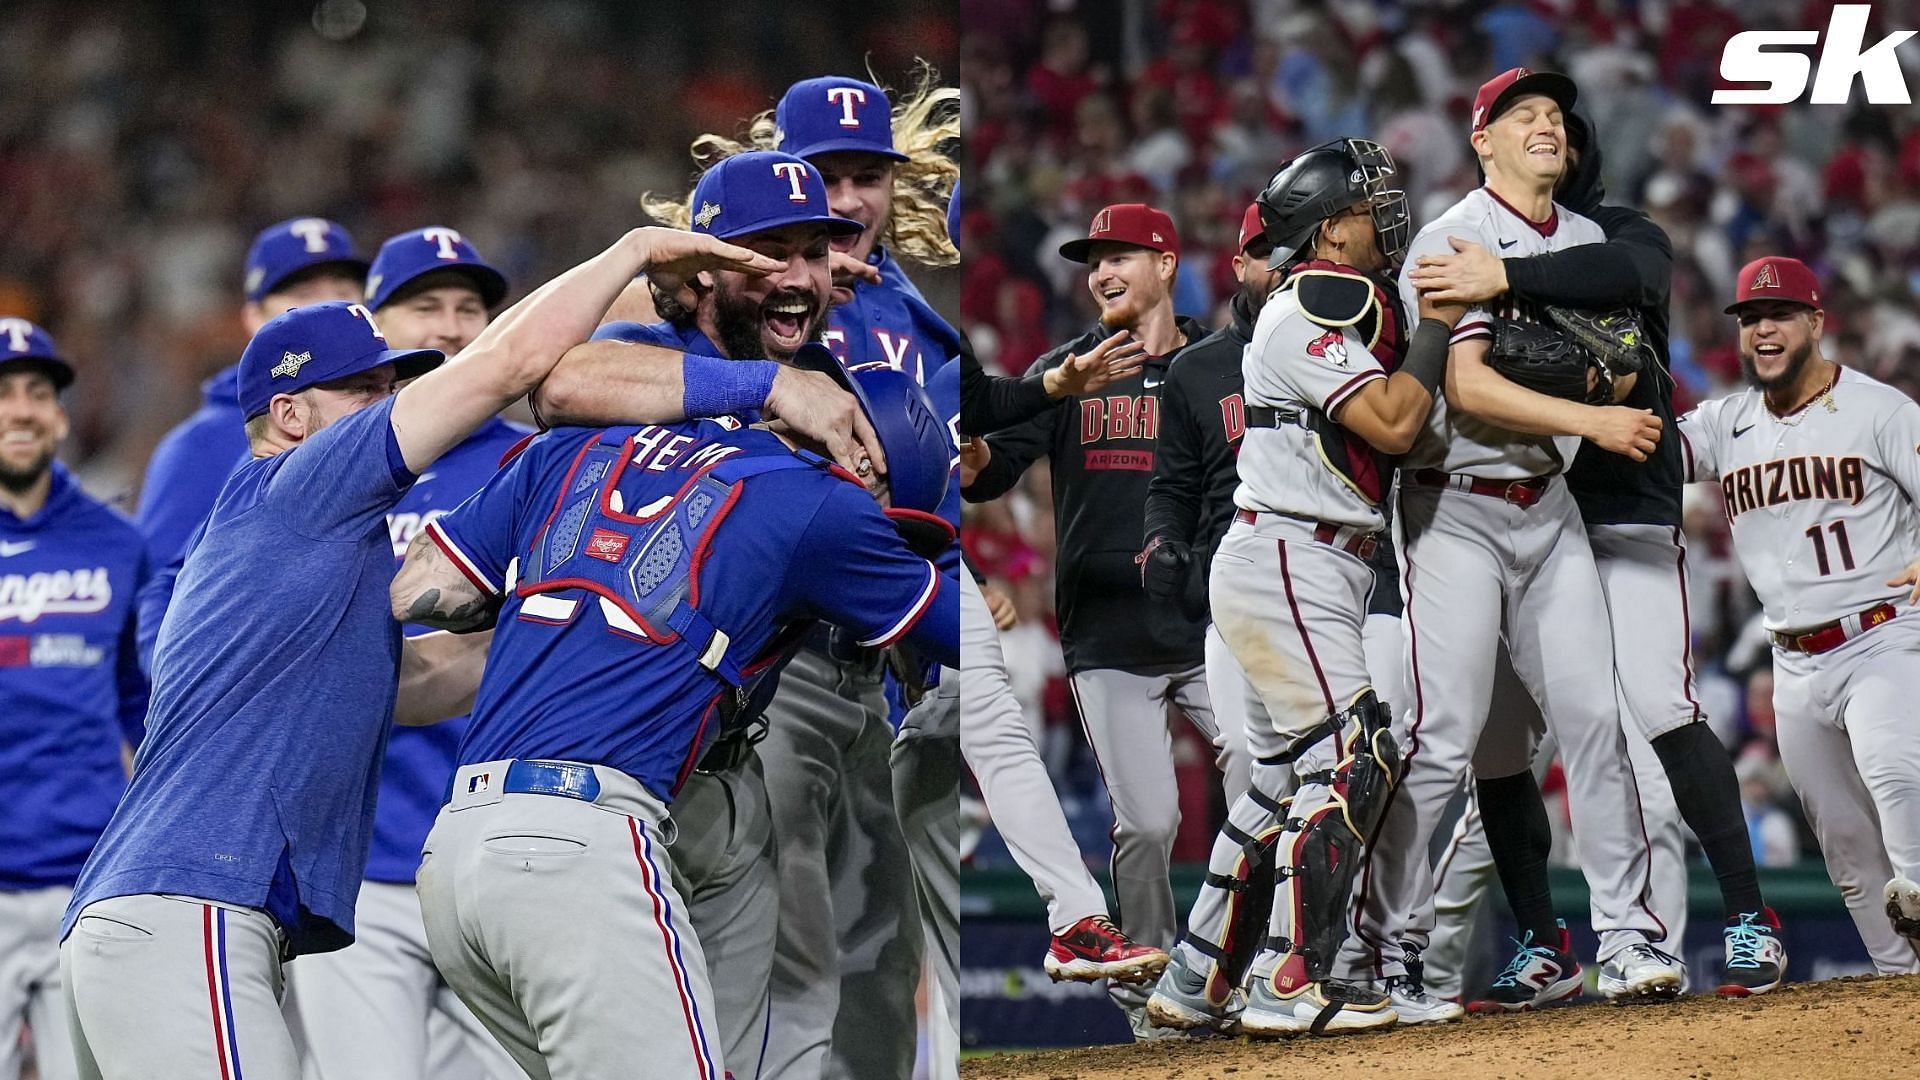 MLB fans take issue with MLB analyst for underestimating D-backs vs. Rangers World Series